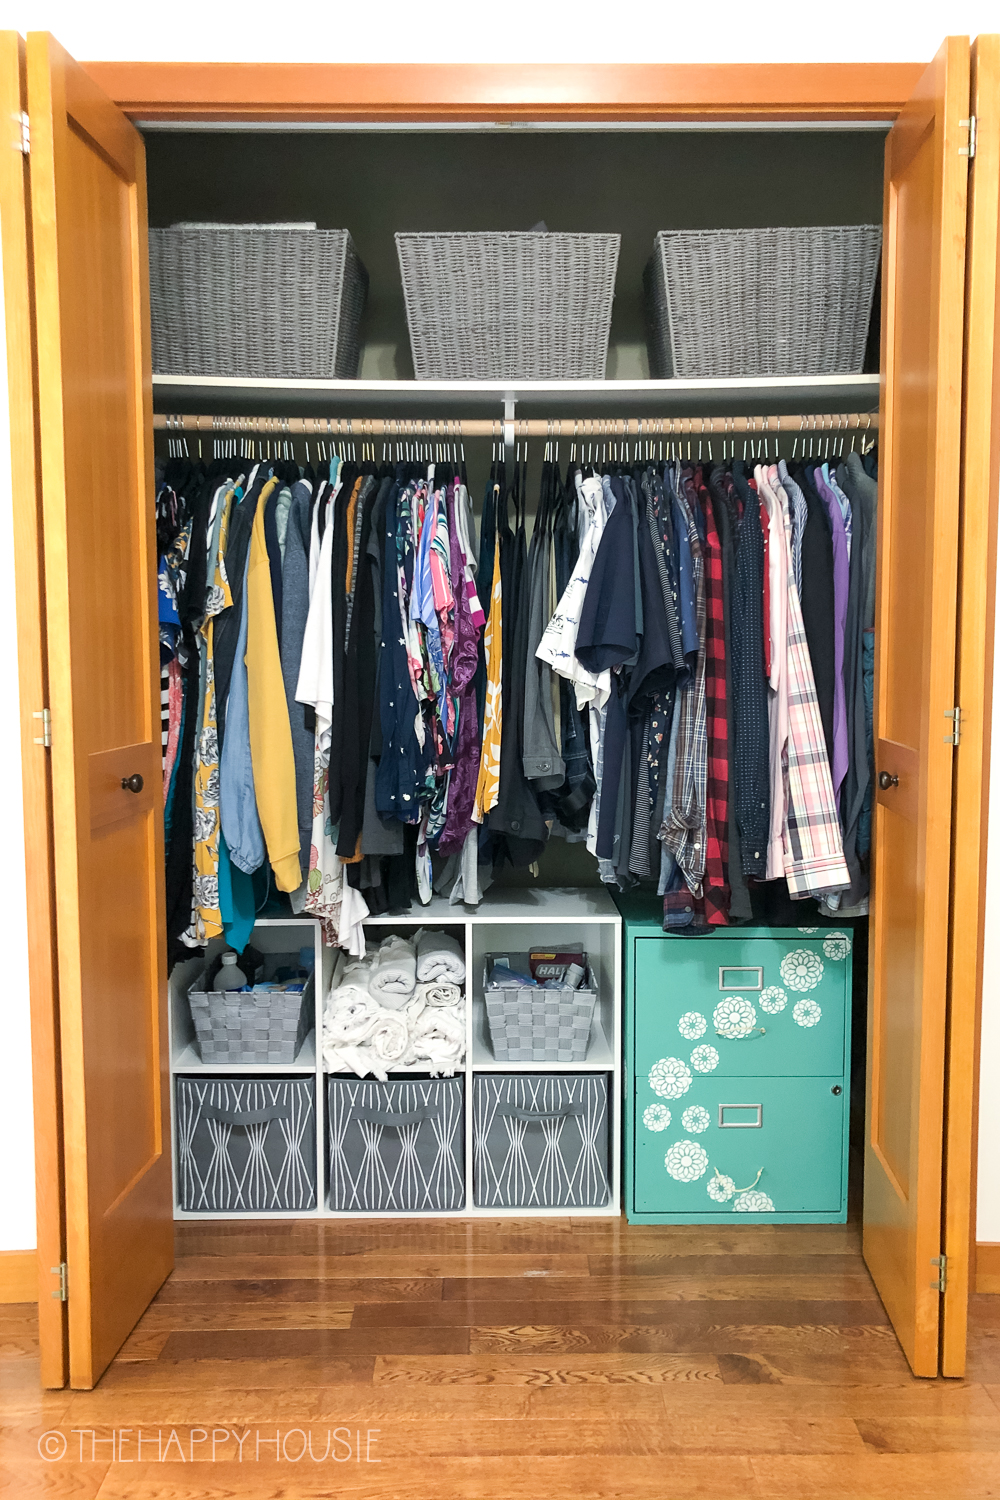 How to Organize Clothes and Shoes in Your Closet